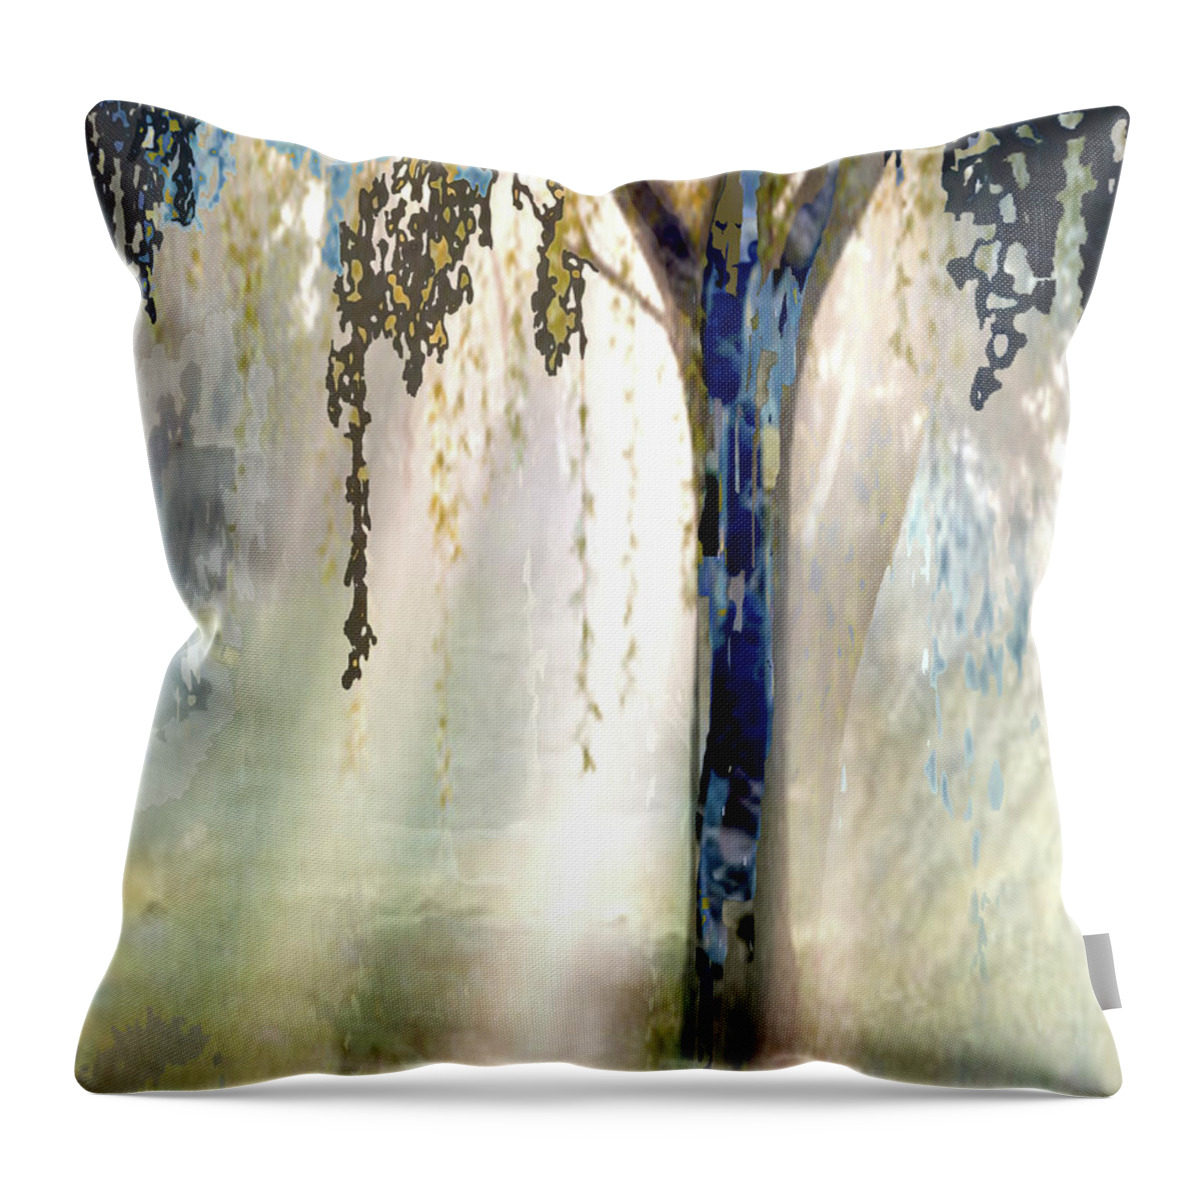 Oil Painting Throw Pillow featuring the painting Natures Trees Connected by Todd Krasovetz